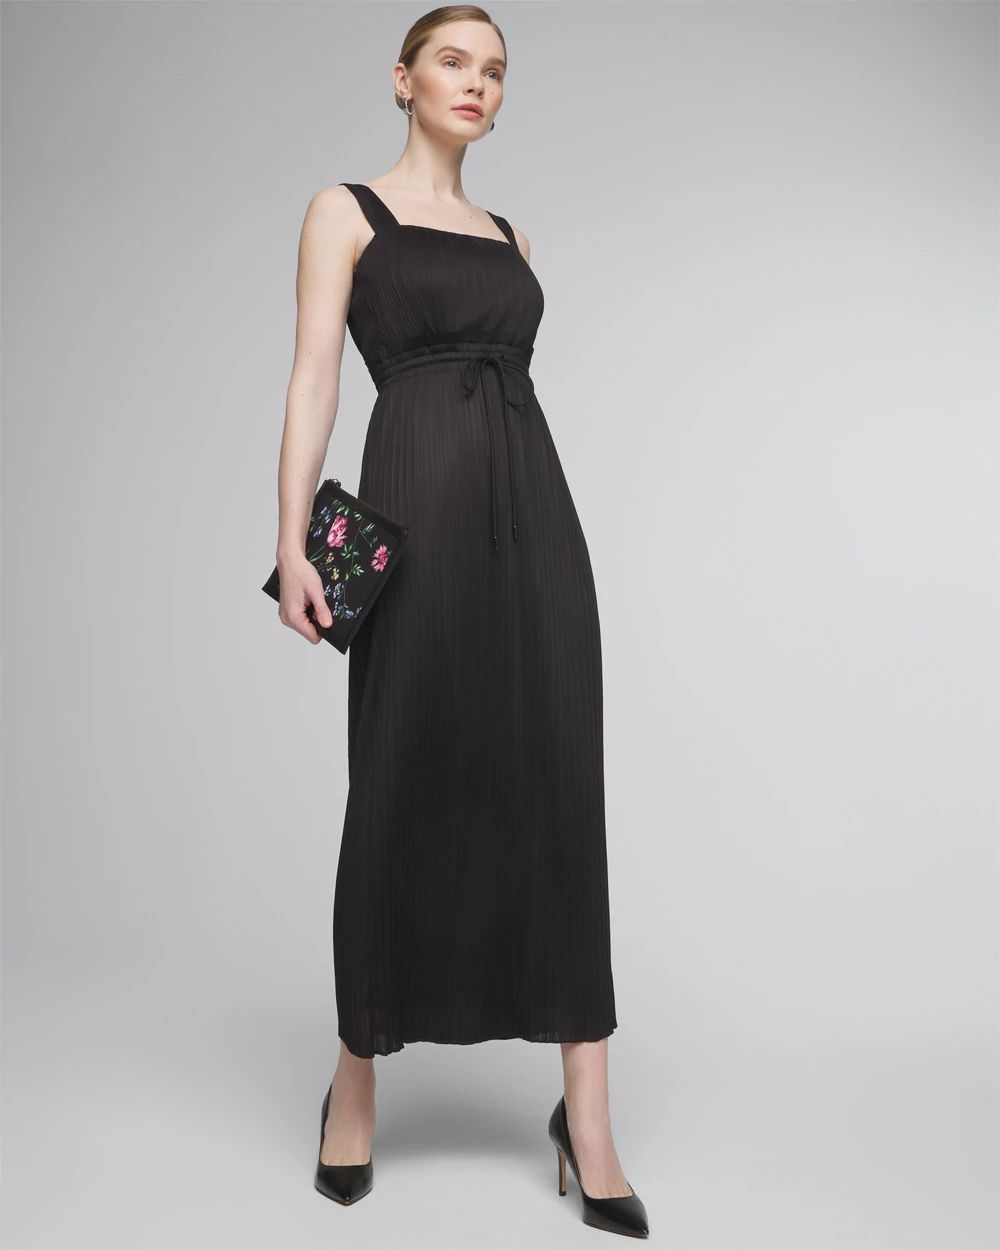 Sleeveless Tie-Waist Pleated Midi Dress click to view larger image.